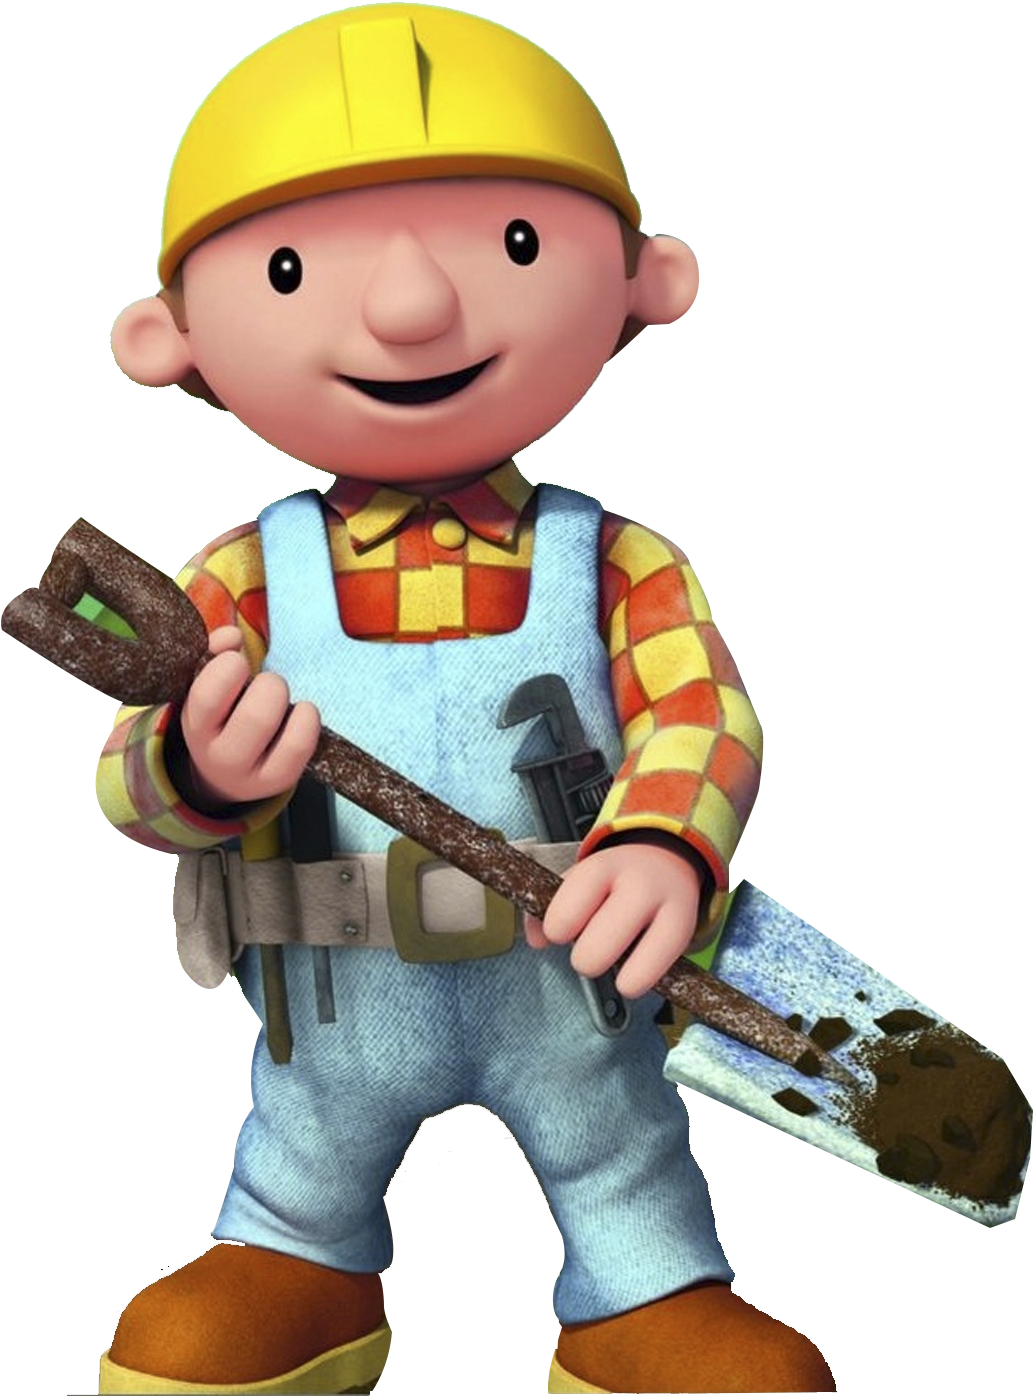 Download Animated Construction Character | Wallpapers.com